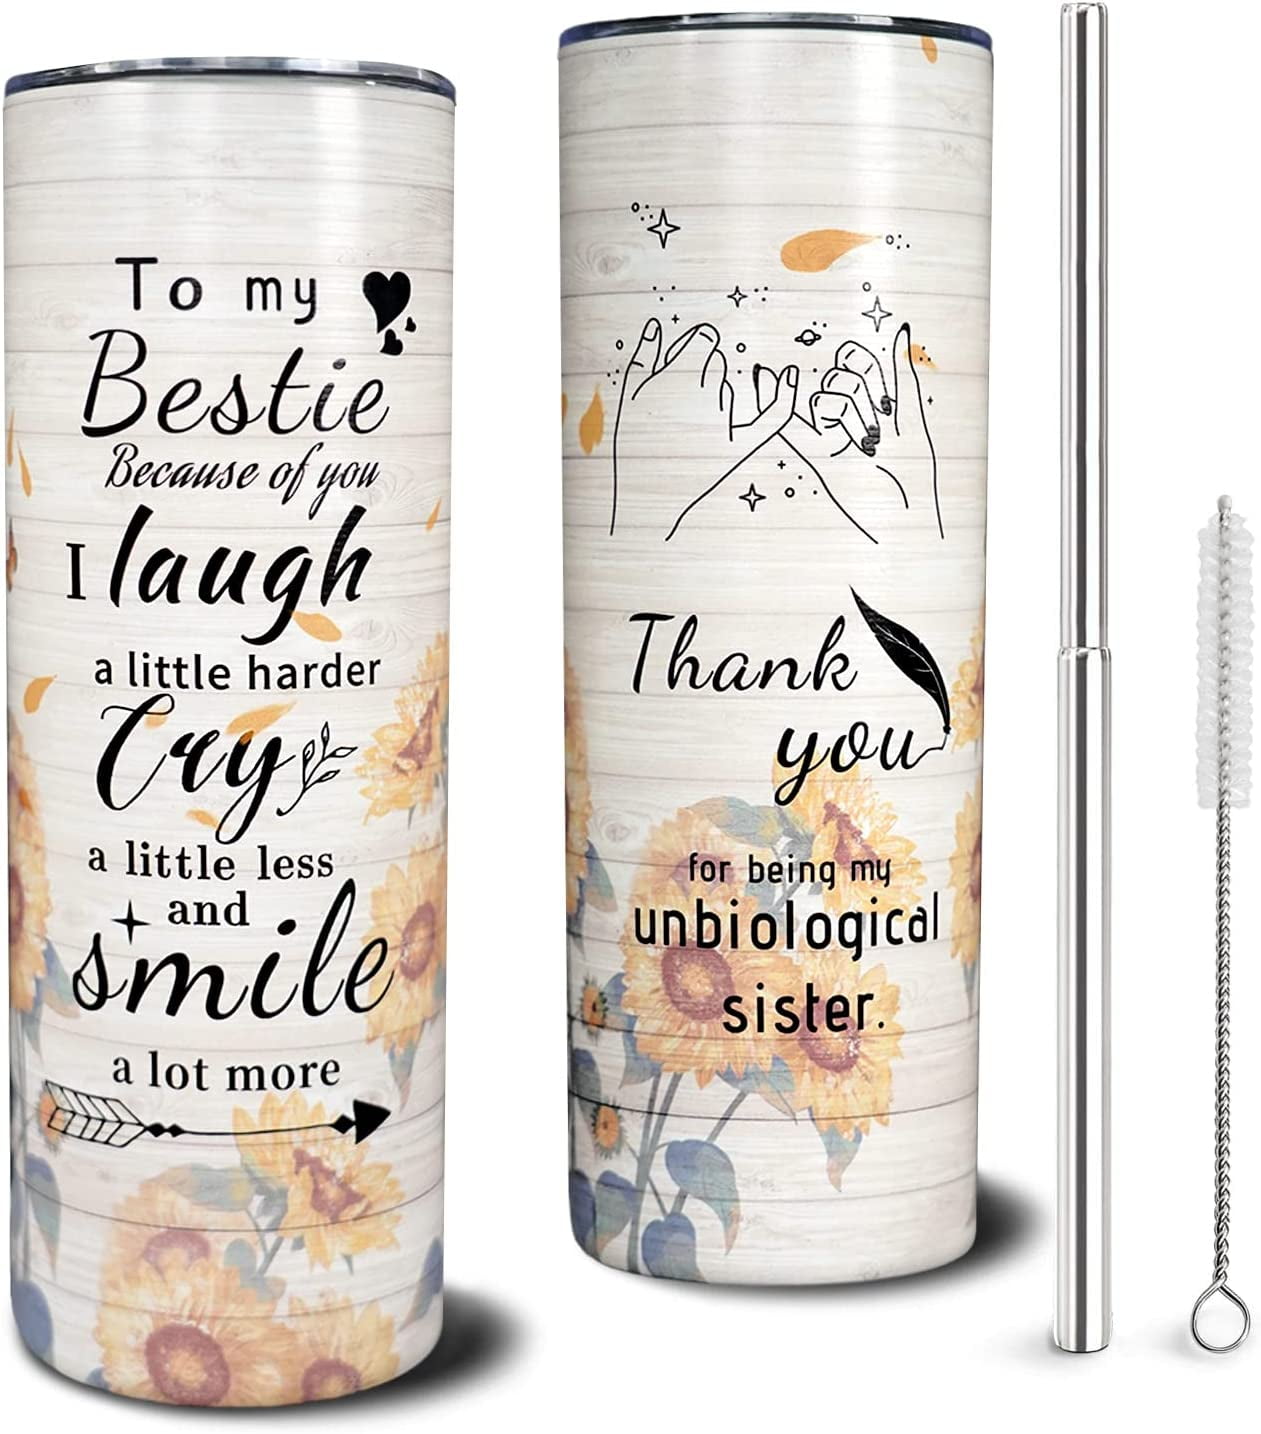 Stainless Steel Tumbler, Singer Merch Fans Gift Coffee Cup for Women Man  Girls Friends Sister, Doubl…See more Stainless Steel Tumbler, Singer Merch